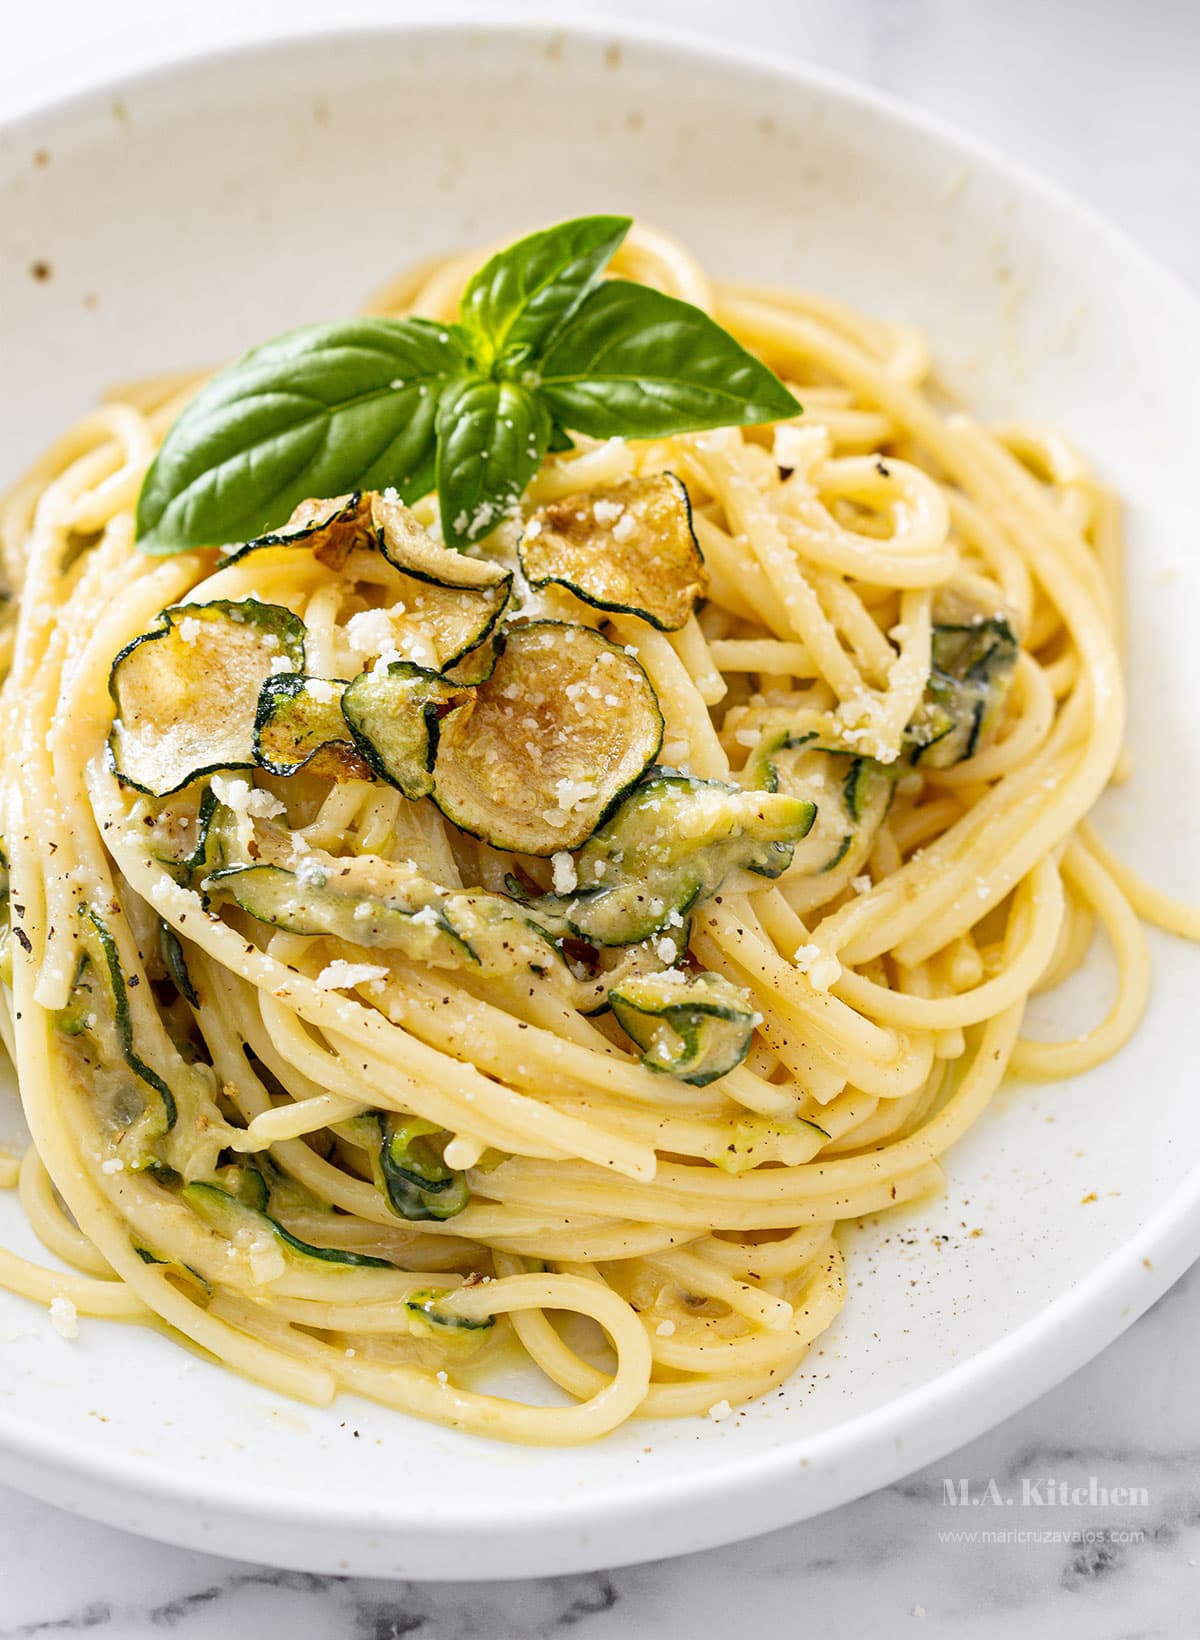 Spaghetti Alla Nerano in a plate garnished with fresh basil leaves.